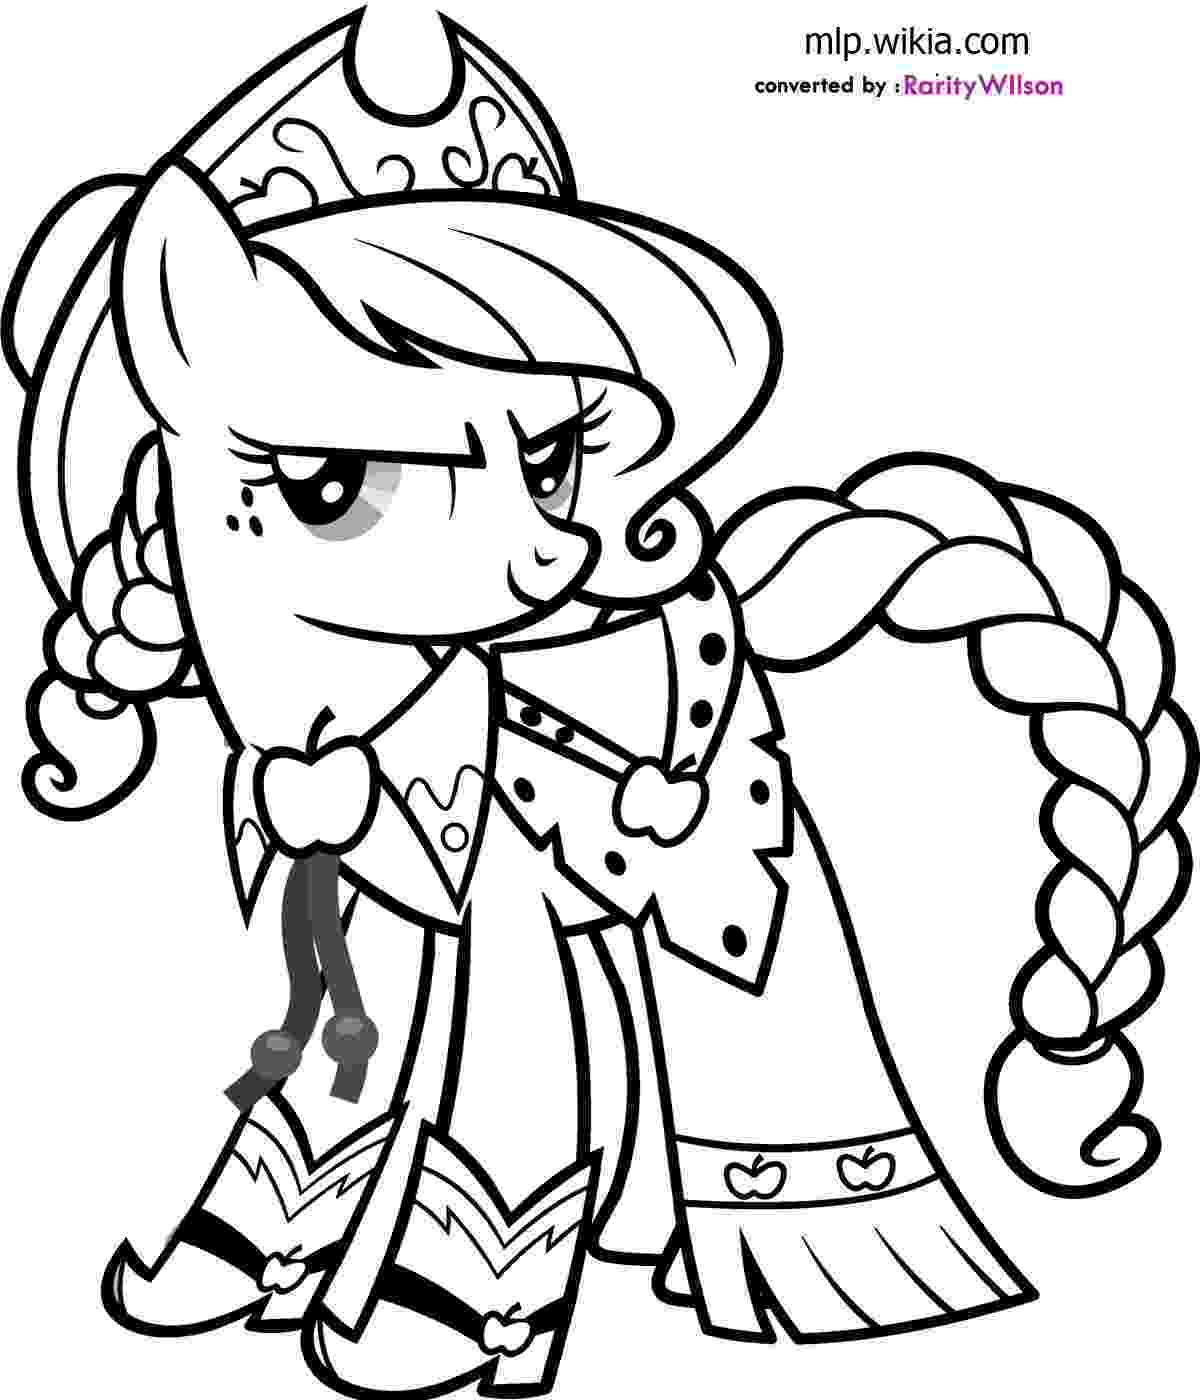 coloring pages of my little pony my little pony coloring pages team colors pony of pages little my coloring 